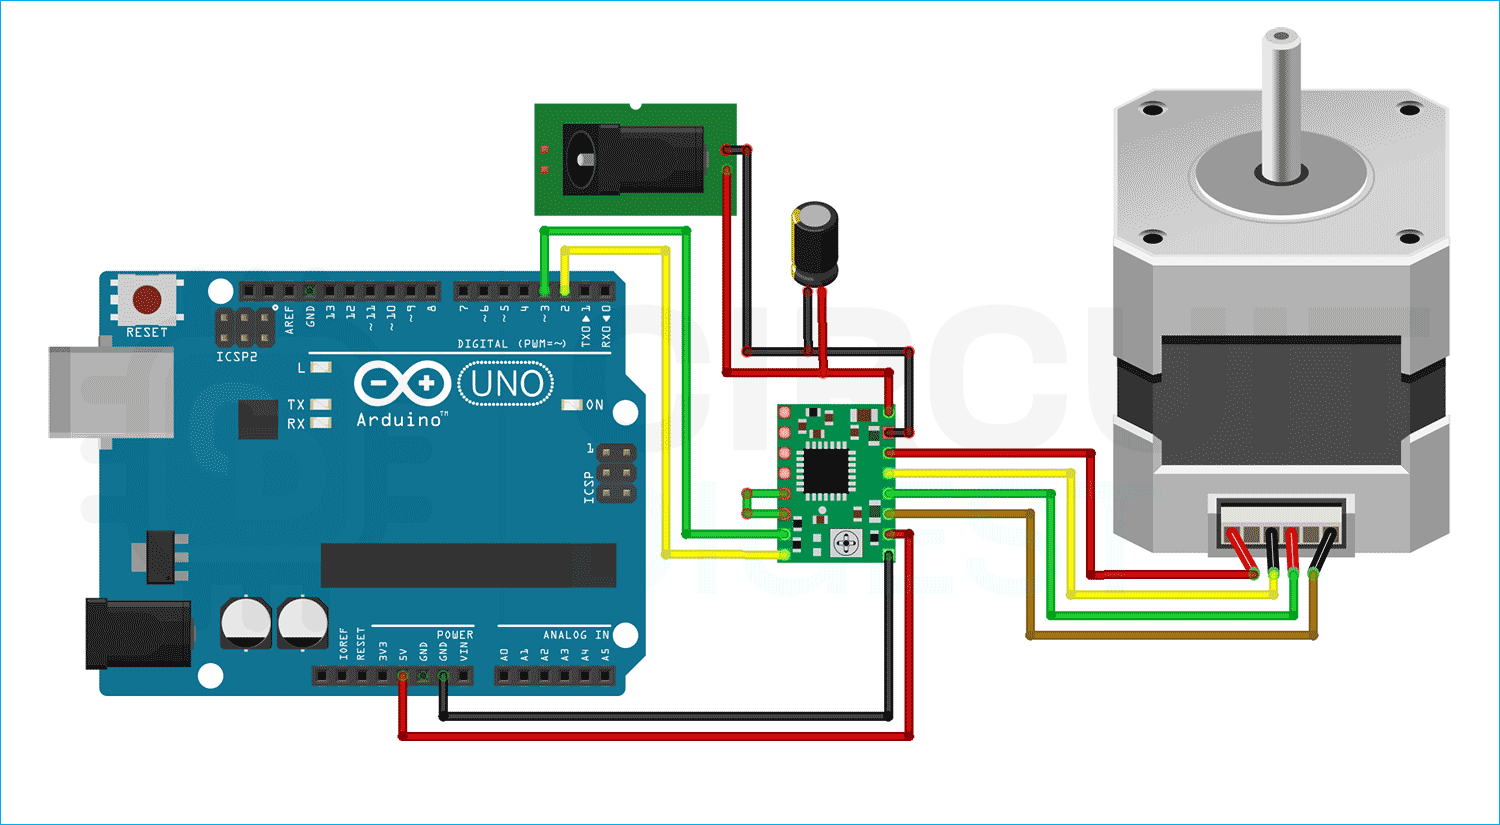 Circuit Diagram of Interfacing A4988 Stepper Motor with Arduino